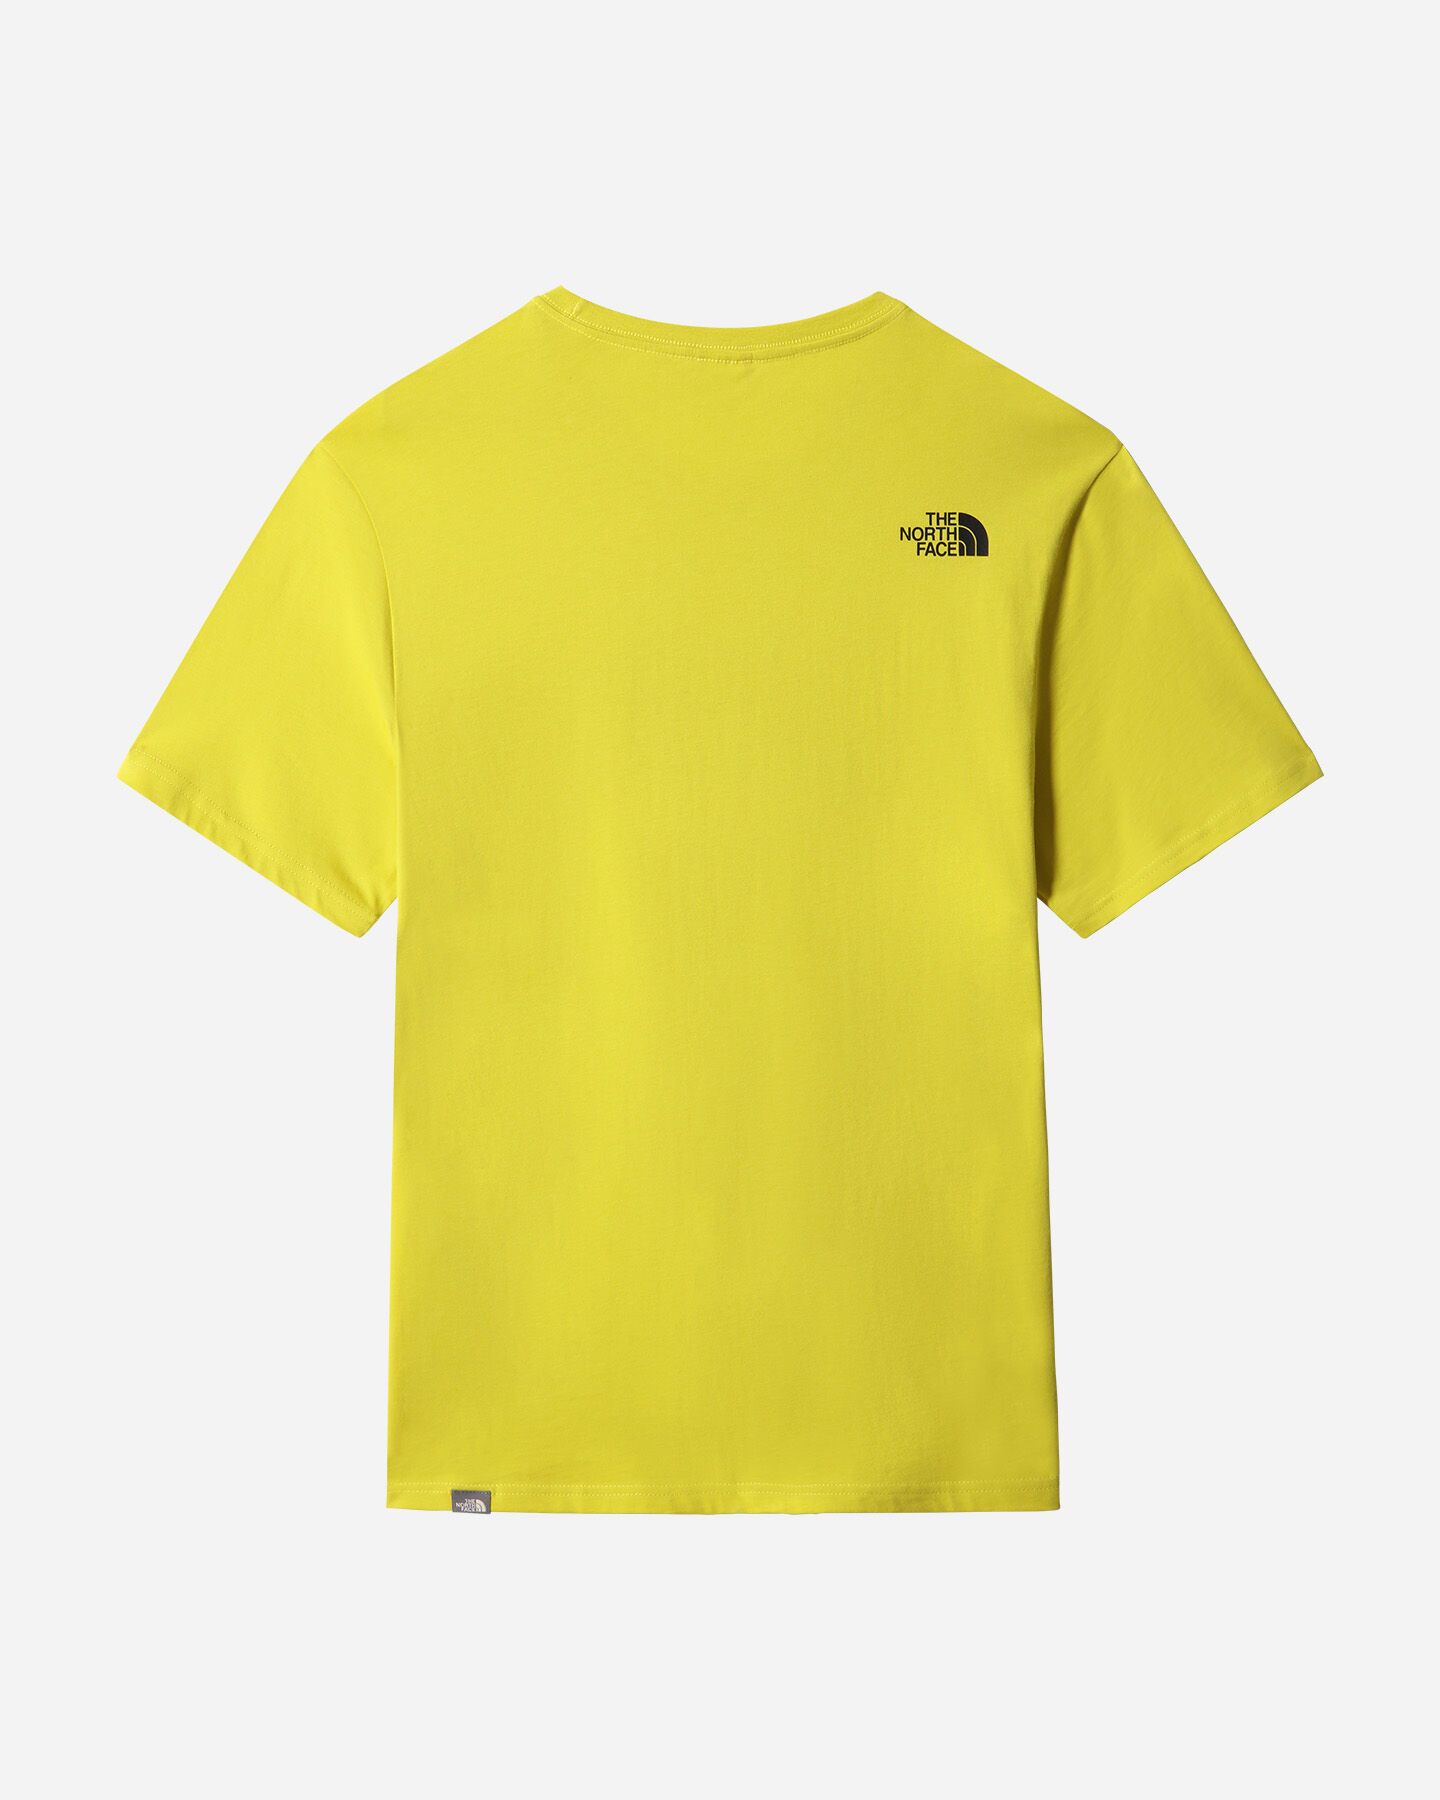  T-Shirt THE NORTH FACE EASY BIG LOGO M S5421994|760|S scatto 1